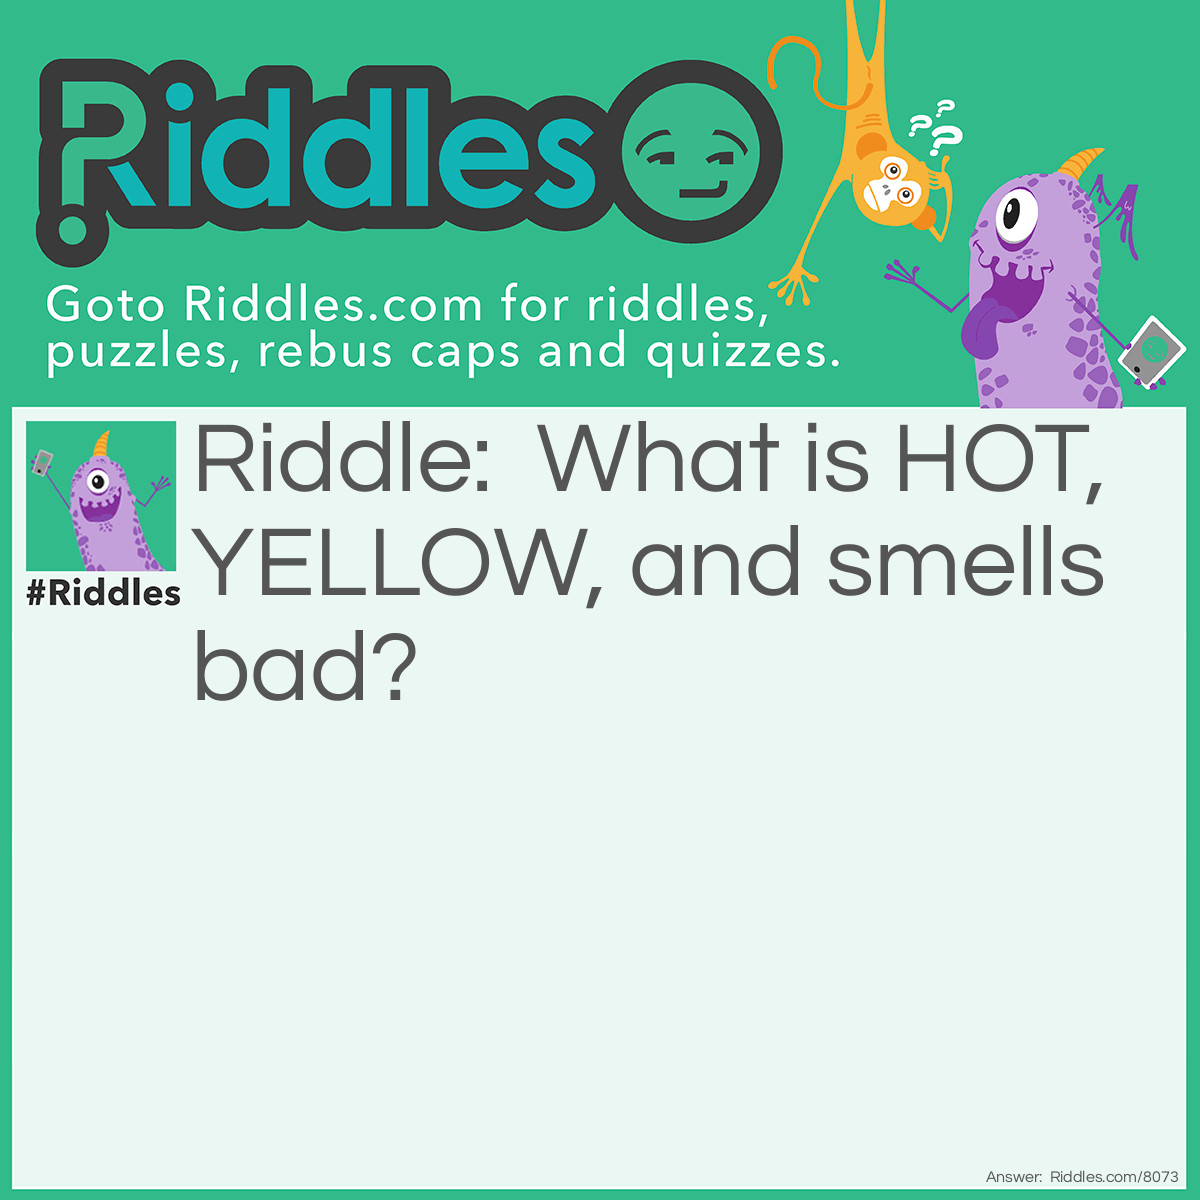 Riddle: What is HOT, YELLOW, and smells bad? Answer: A hot yellow bike in the trash can.